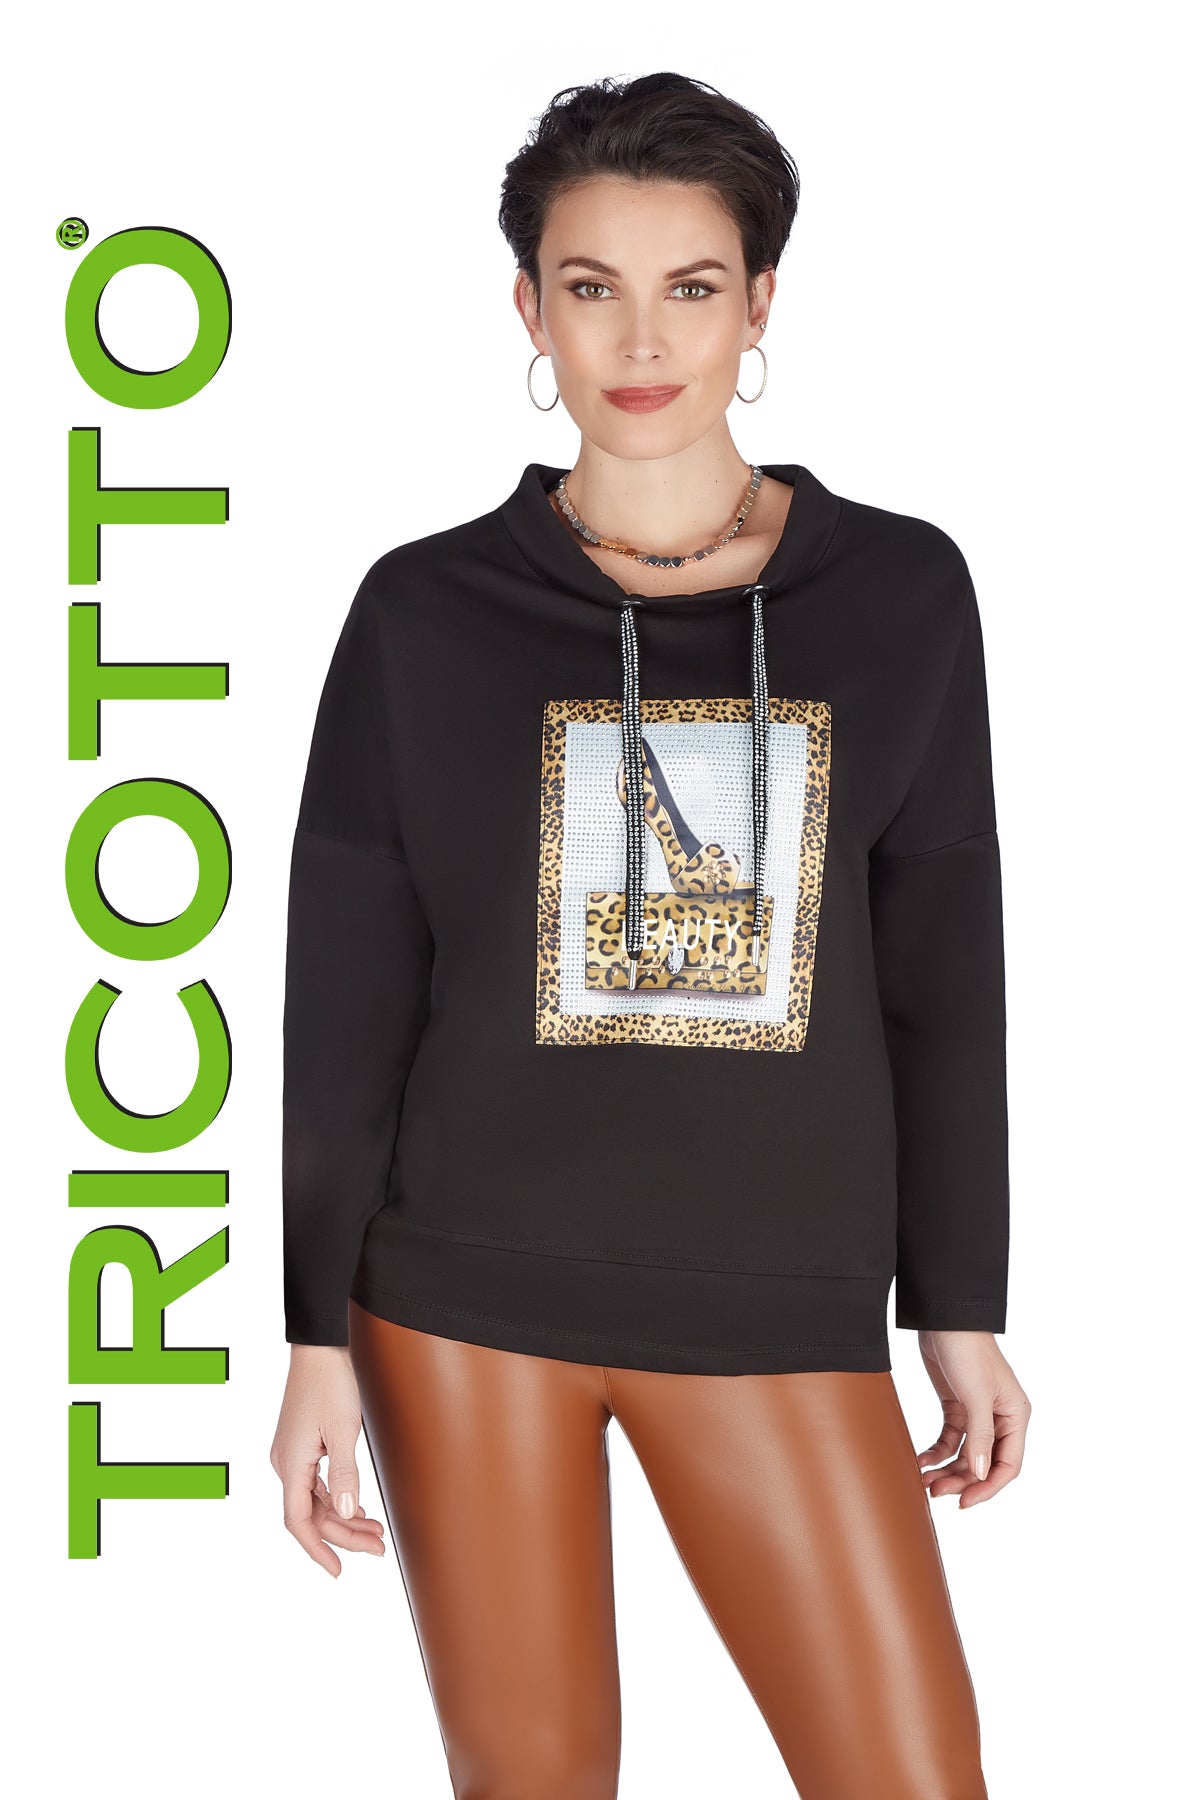 Tricotto Sweaters-Buy Tricotto Sweaters Online-Tricotto Fashion Montreal-Tricotto Fashion Online-Online Sweater Shop